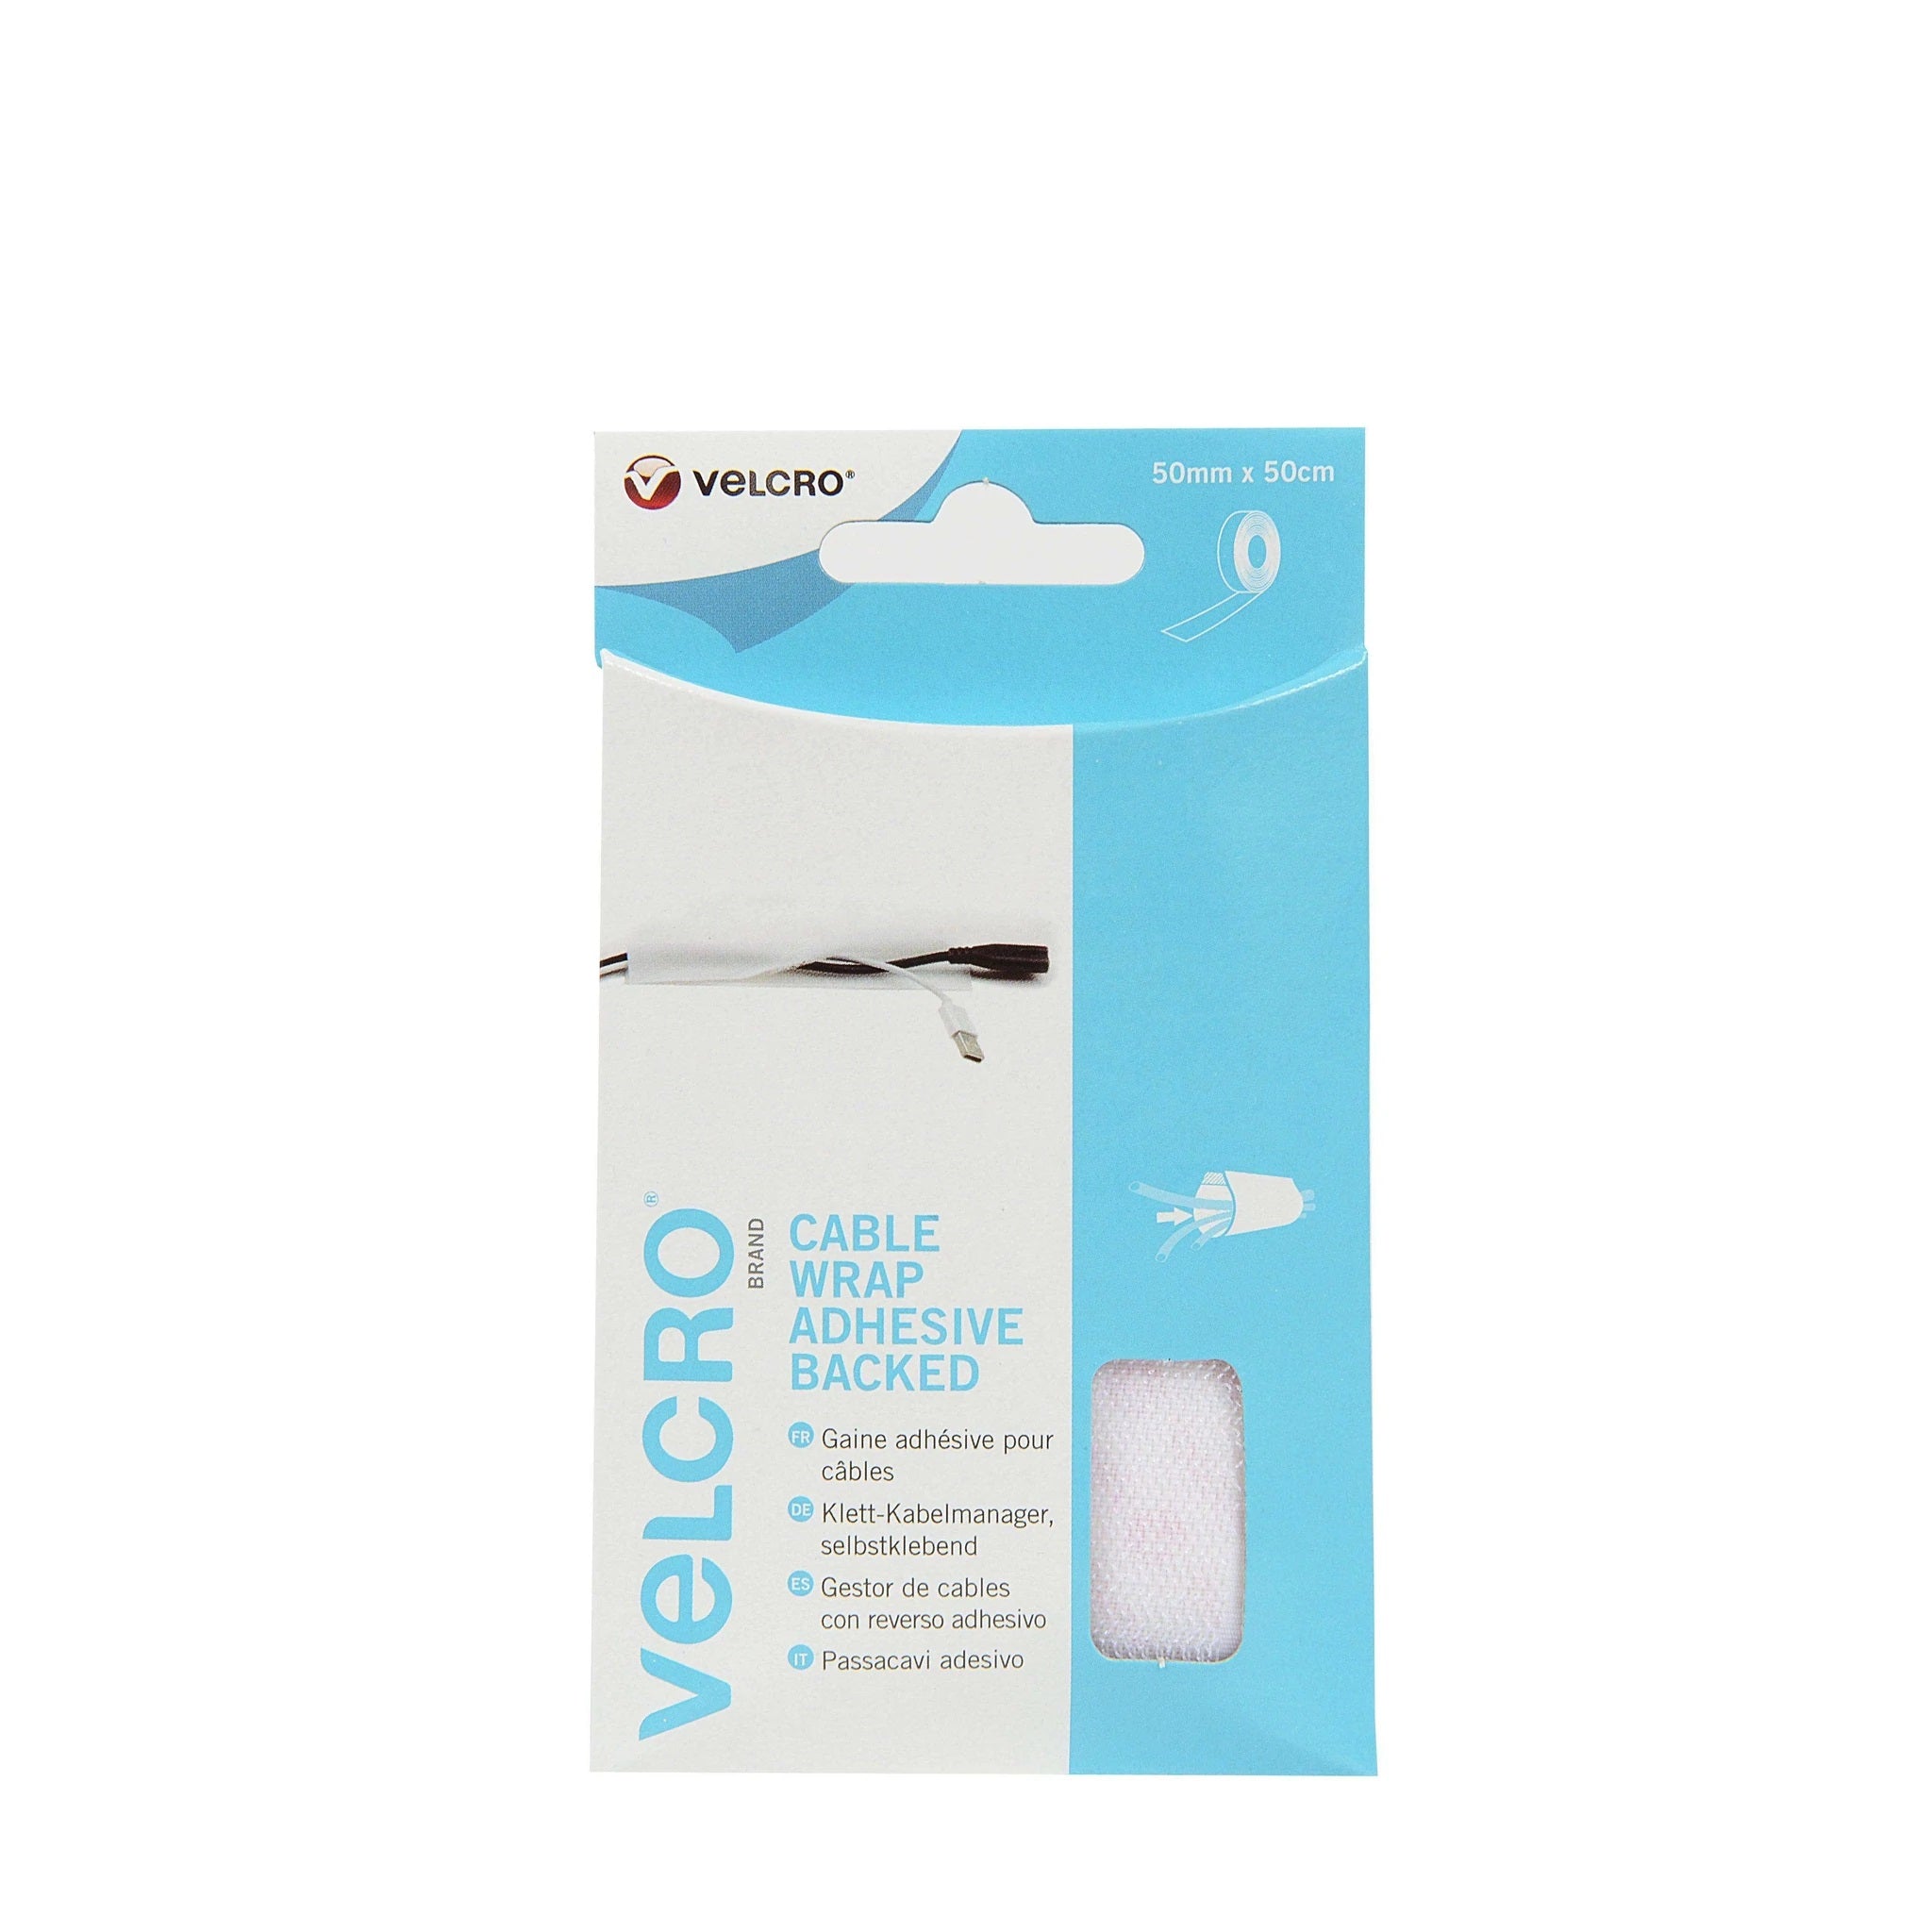 VELCRO® Brand Adhesive Backed Cable Wrap - 1 unit